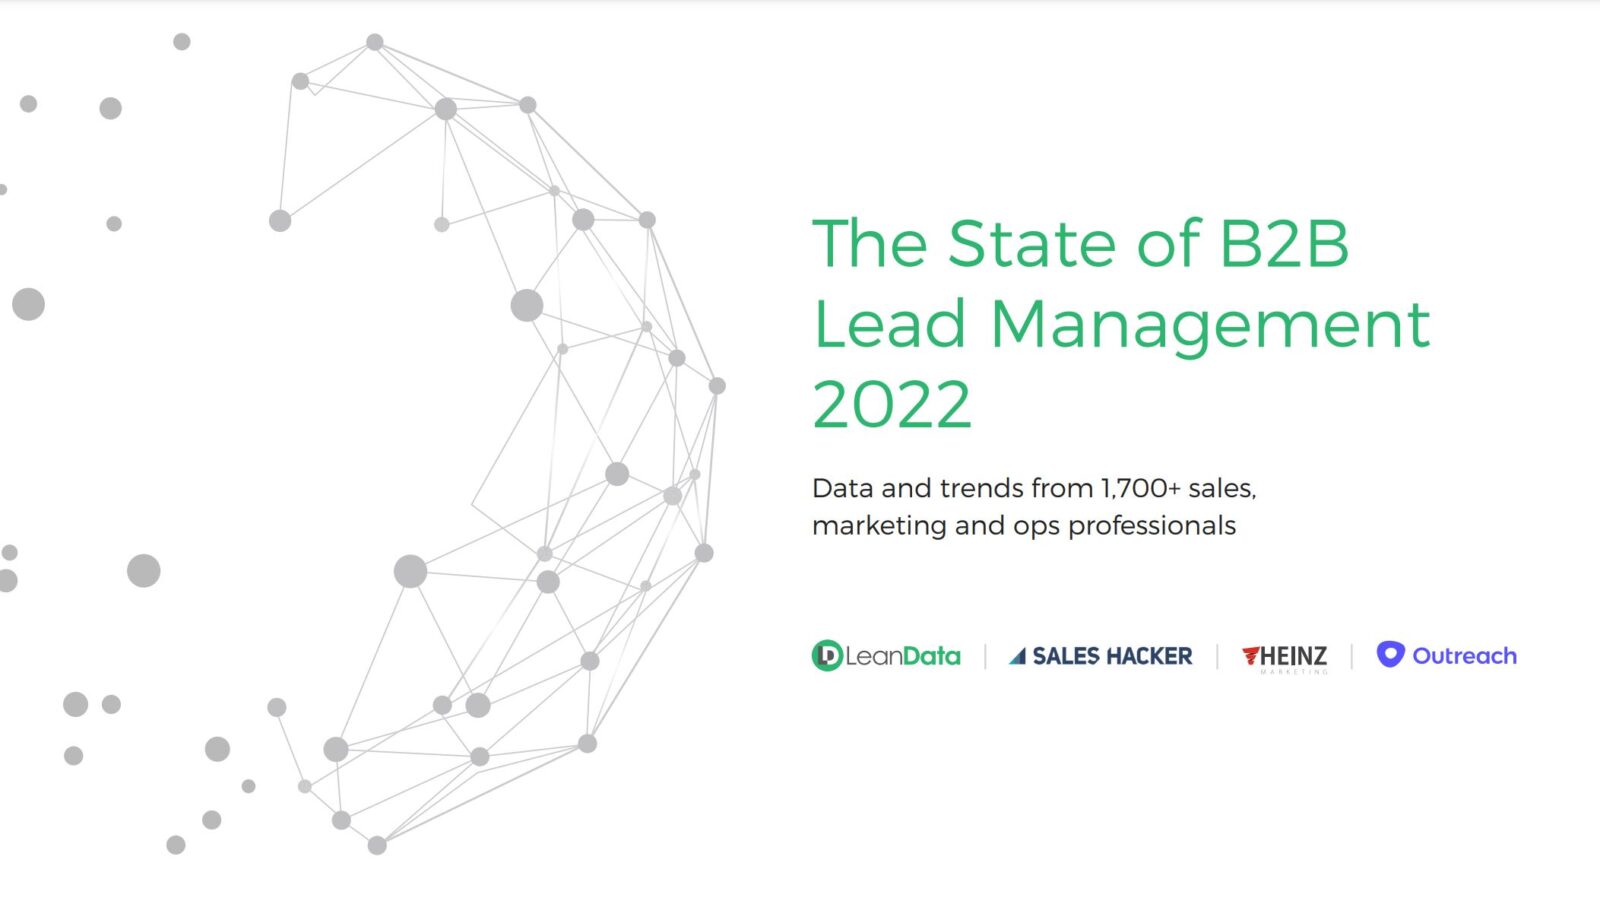 The State of B2B Lead Management 2022